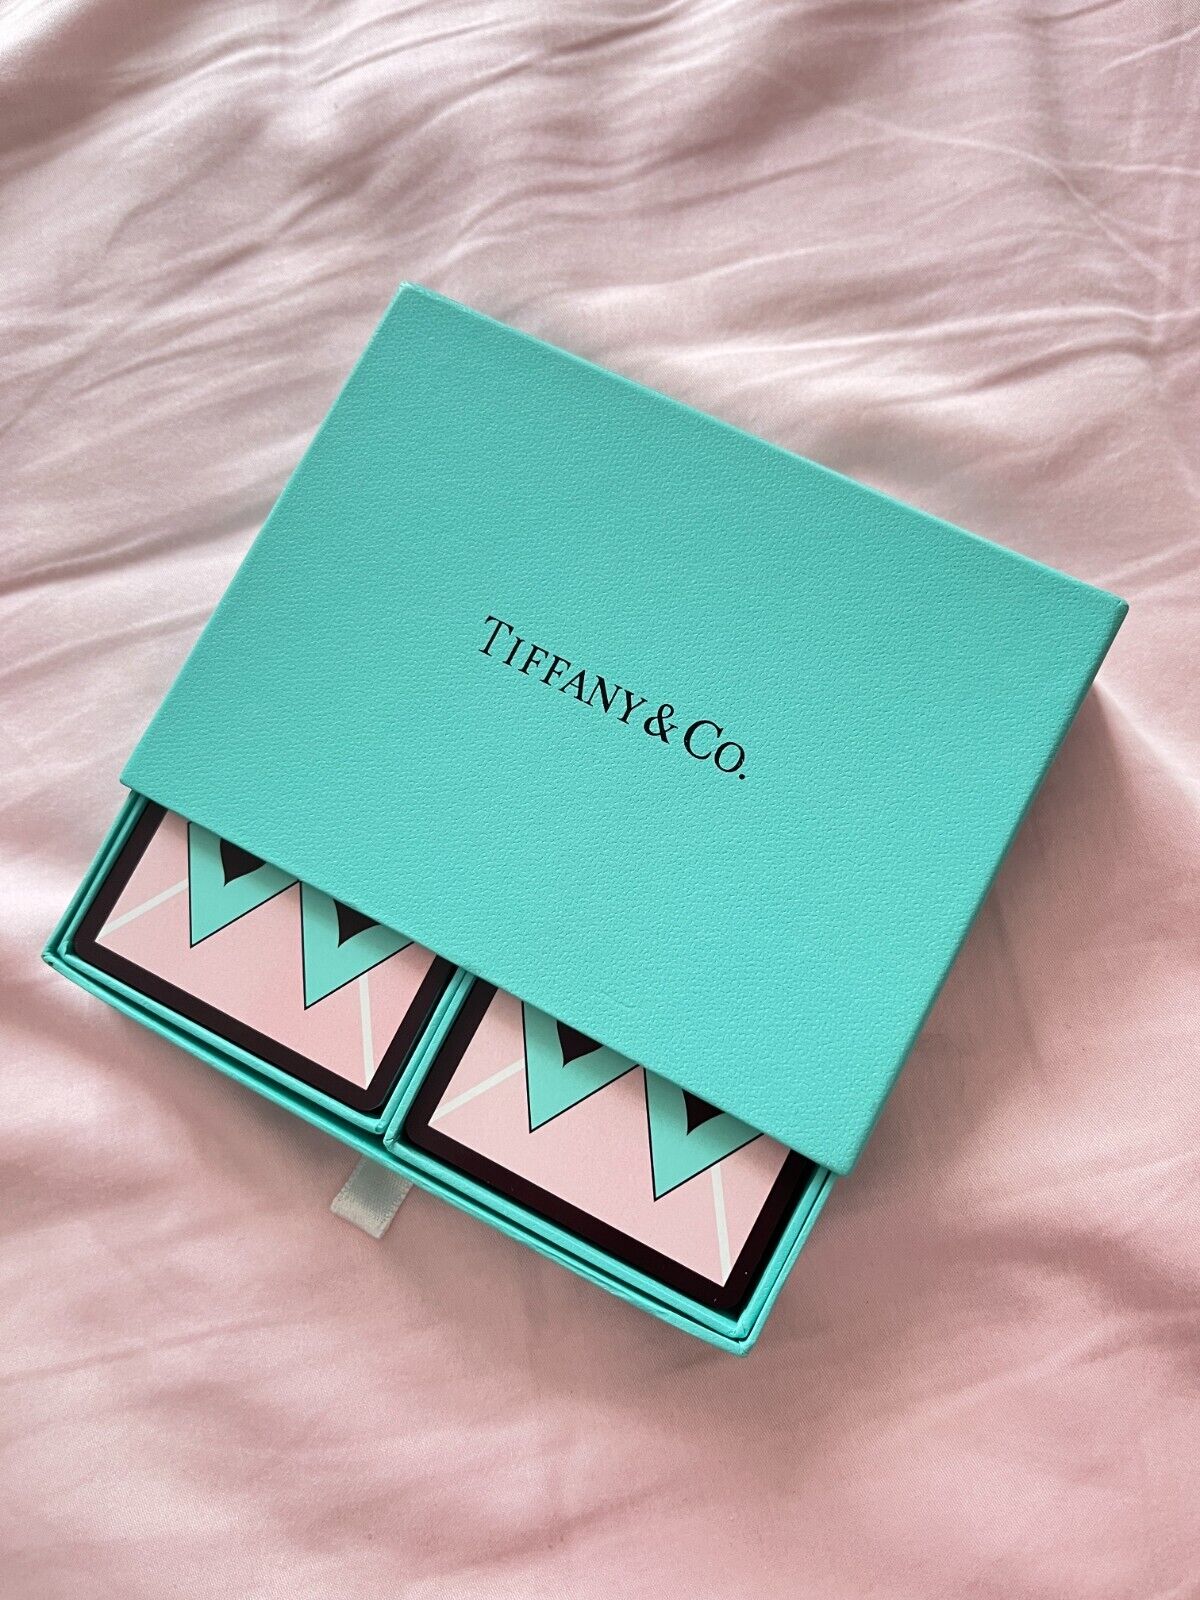 Tiffany and Co Poker Card Set- Brand NEW - Limited Edition